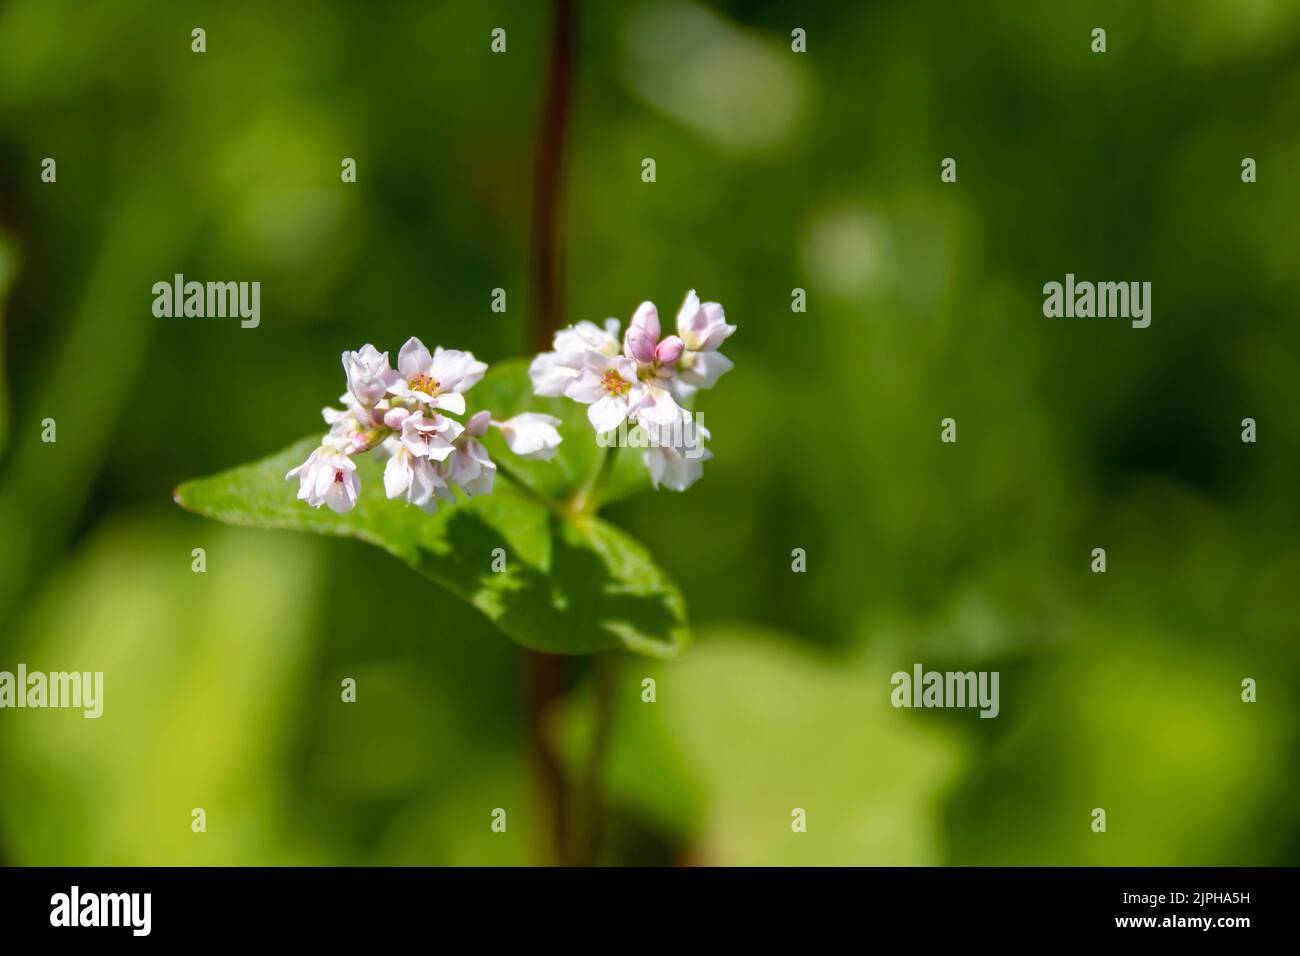 close up of pink white flowers of buckwheat fagopyrum esculentum plant and heart shaped leaf against a blurred green background Stock Photo